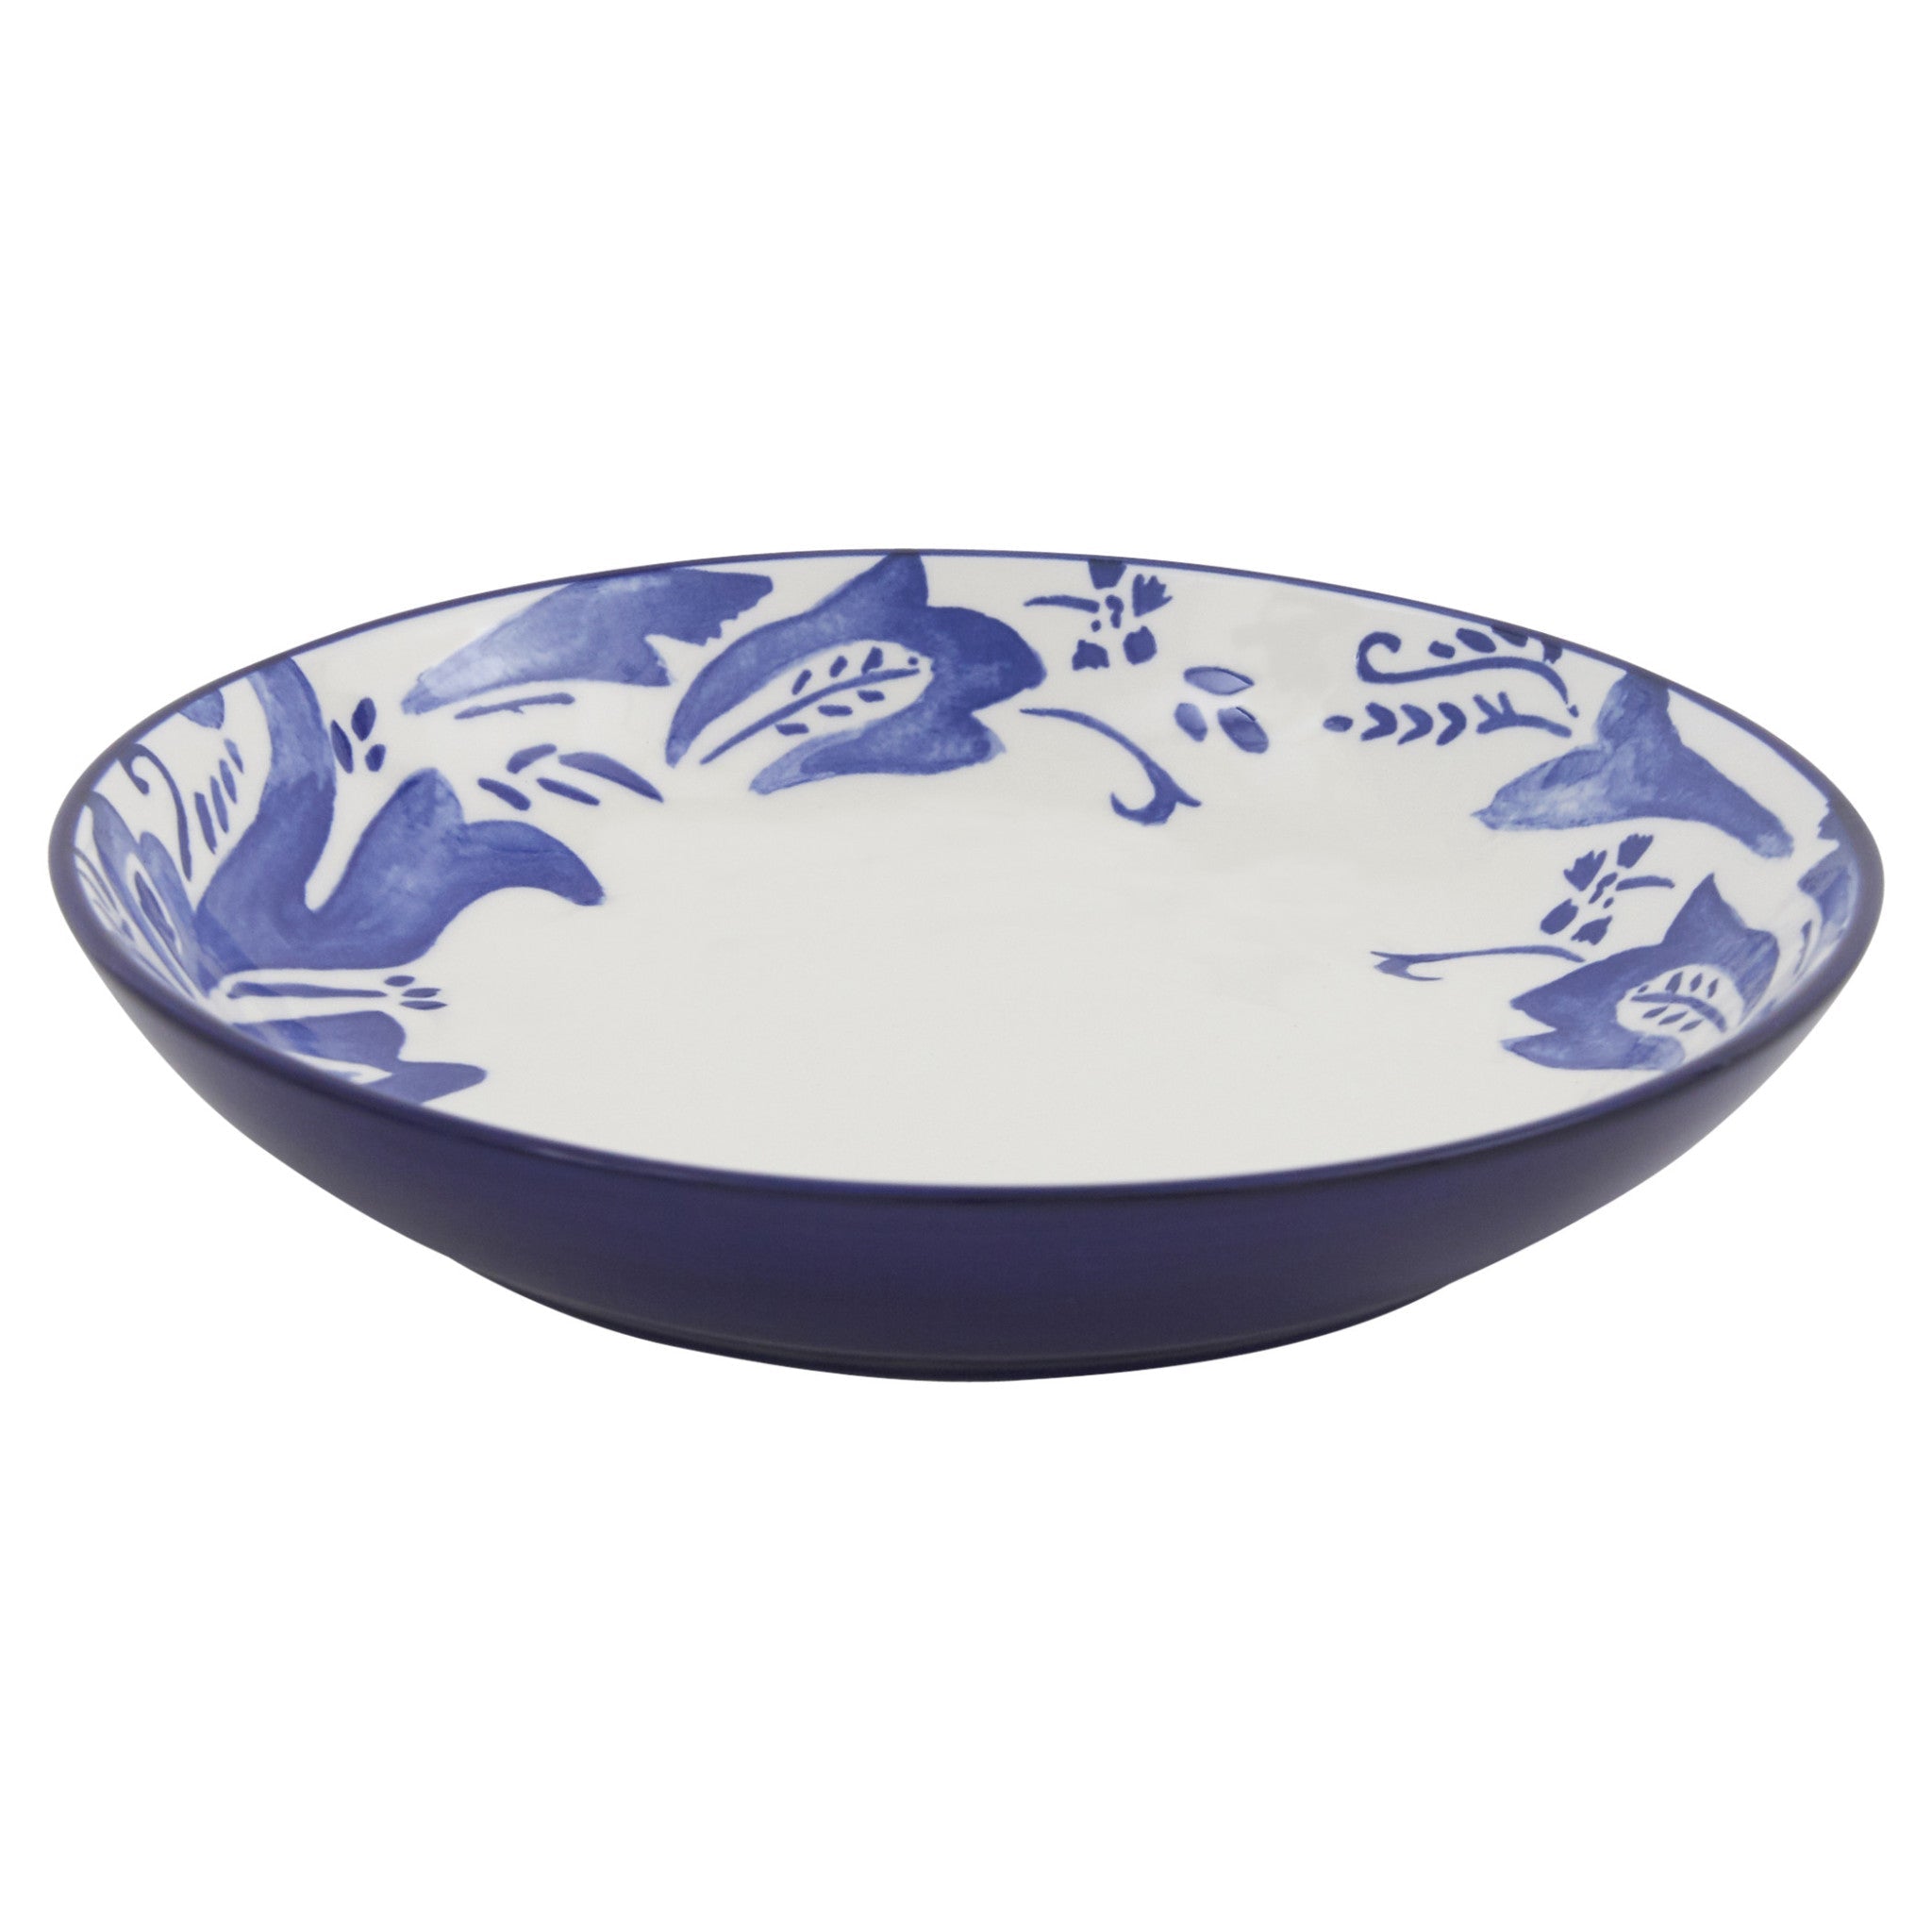 Blue and White Sixteen Piece Round Floral Ceramic Service For Four Dinnerware Set - Tuesday Morning-Dinnerware